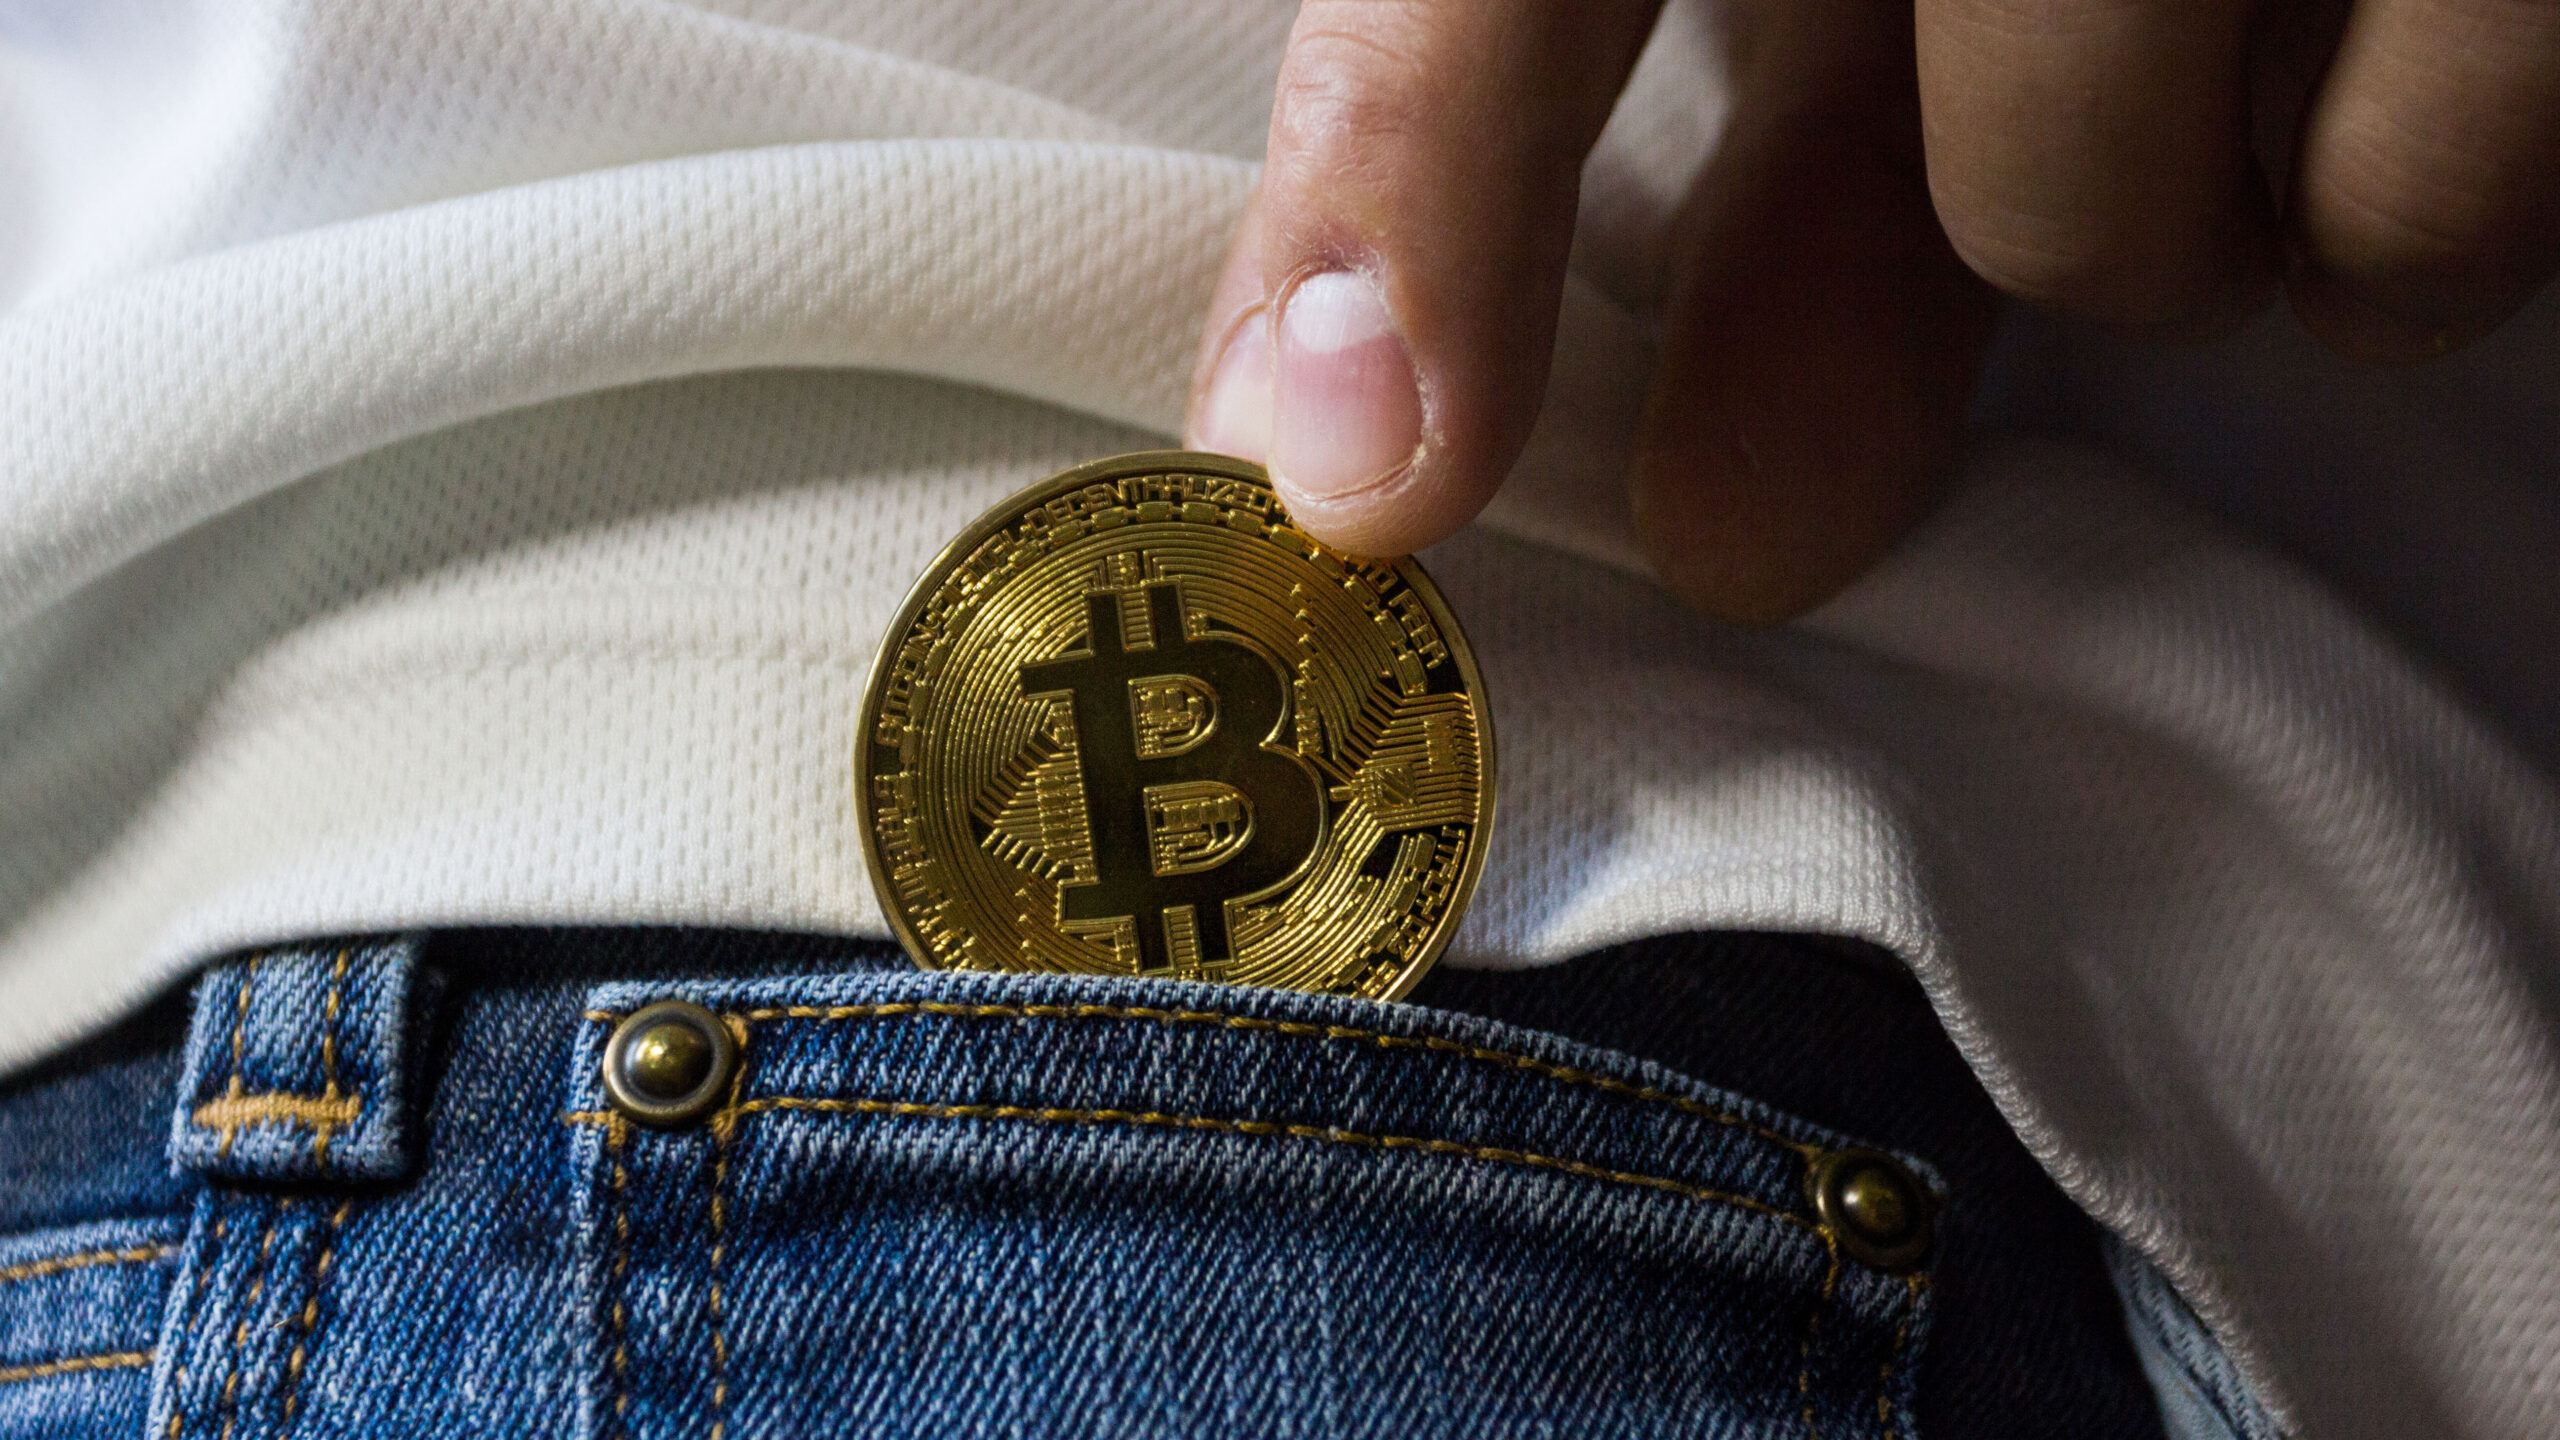 A hand places a coin with bitcoin symbol into jeans pocket.